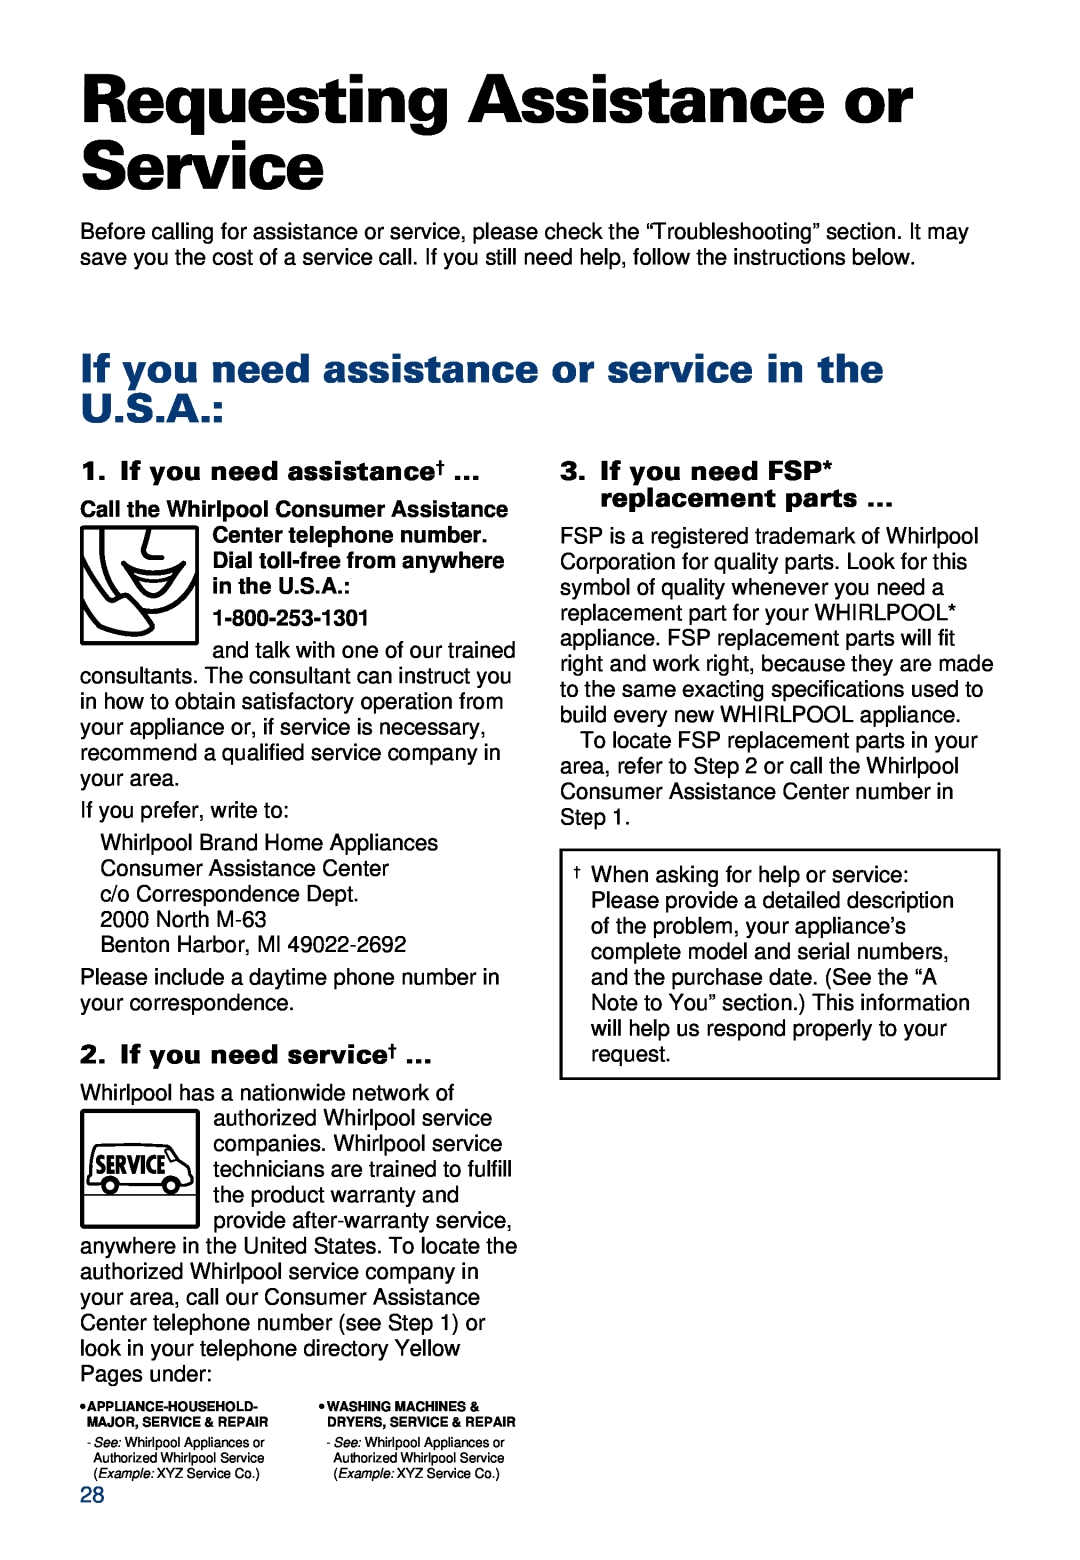 Whirlpool 900 Requesting Assistance or Service, If you need assistance or service in the U.S.A, If you need assistance† … 